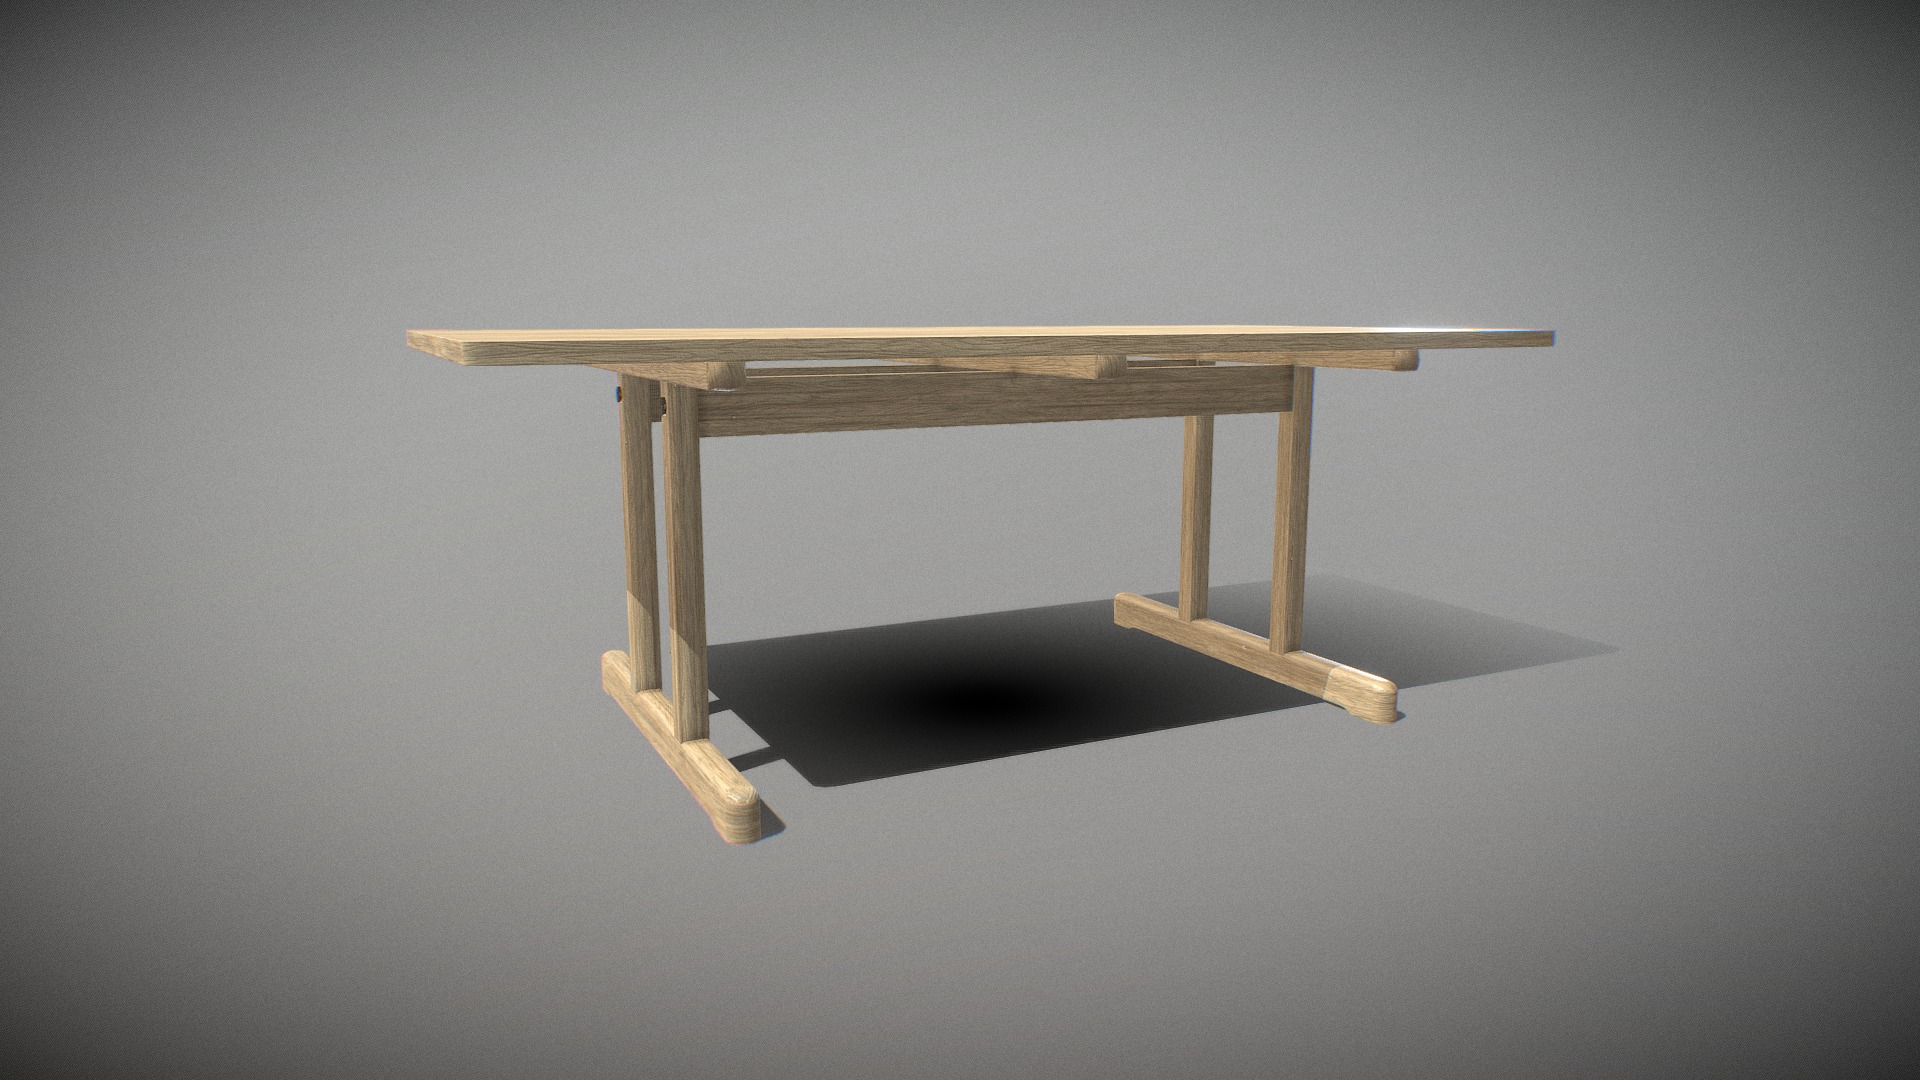 3D model Mogensen 6286 Table-oak soap treated - This is a 3D model of the Mogensen 6286 Table-oak soap treated. The 3D model is about a table with a wooden frame.